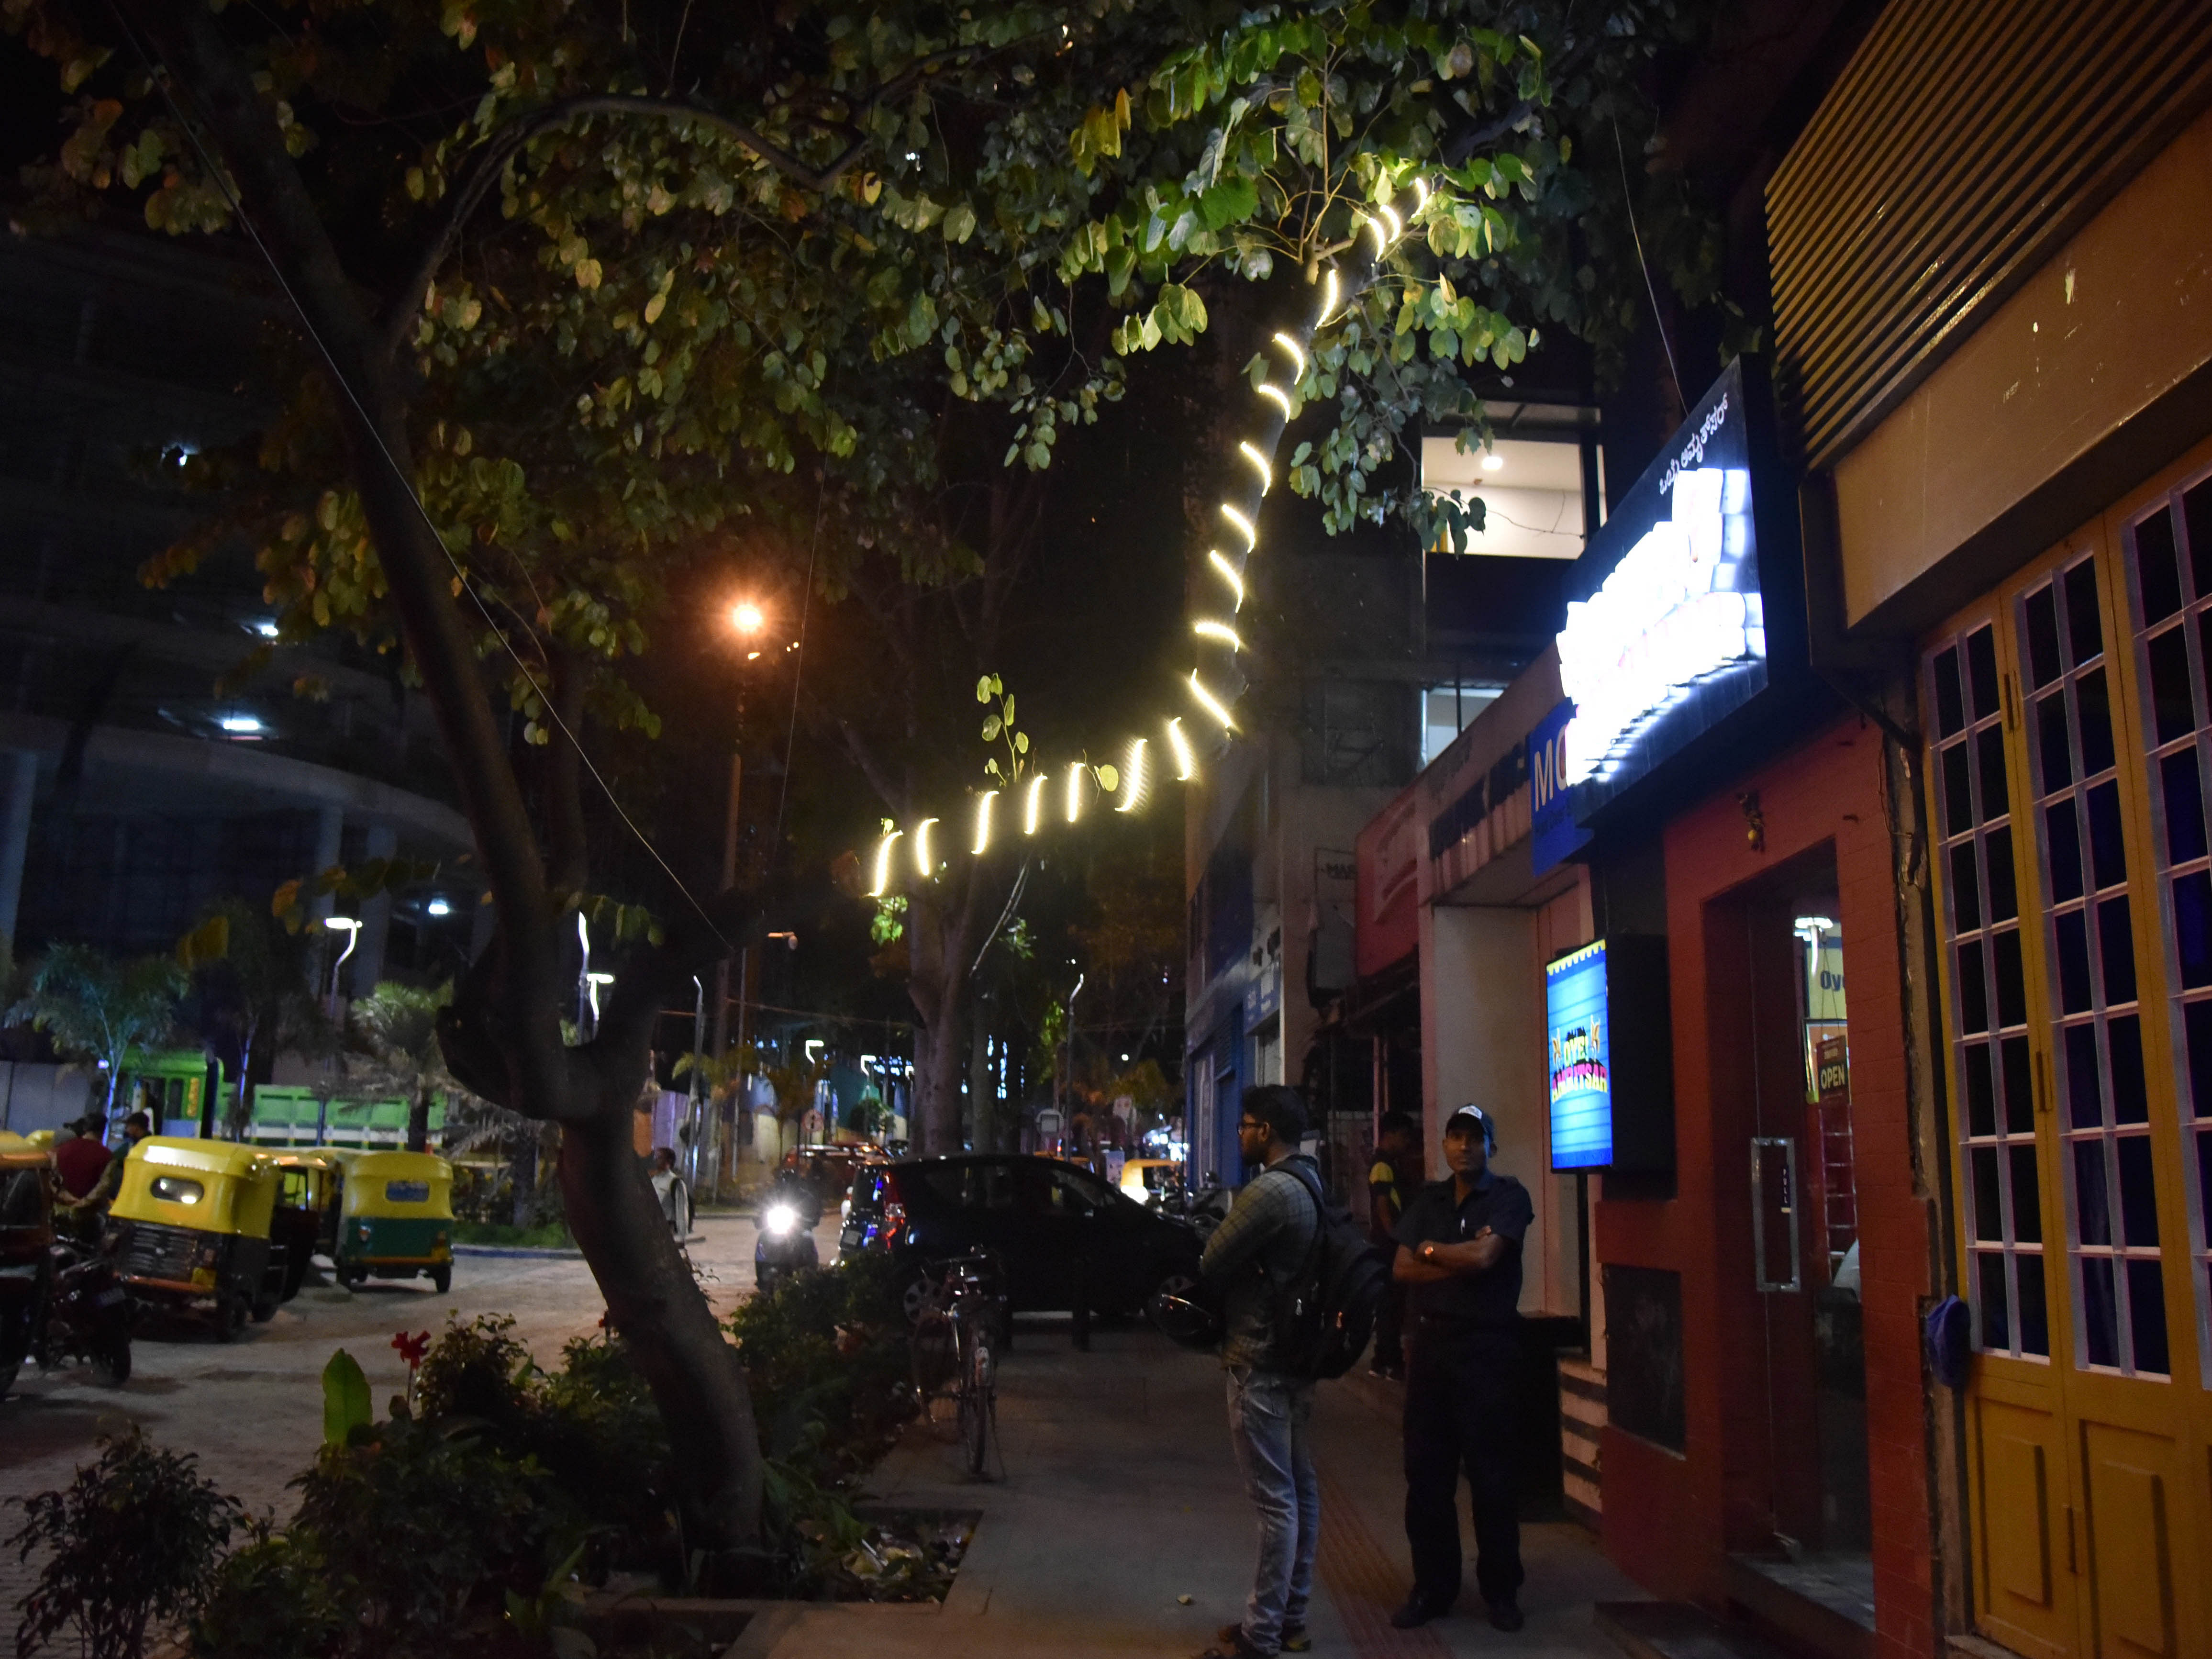 Lights on trees on Church street in front of Hotel Empire. DH Photos by B K Janardhan